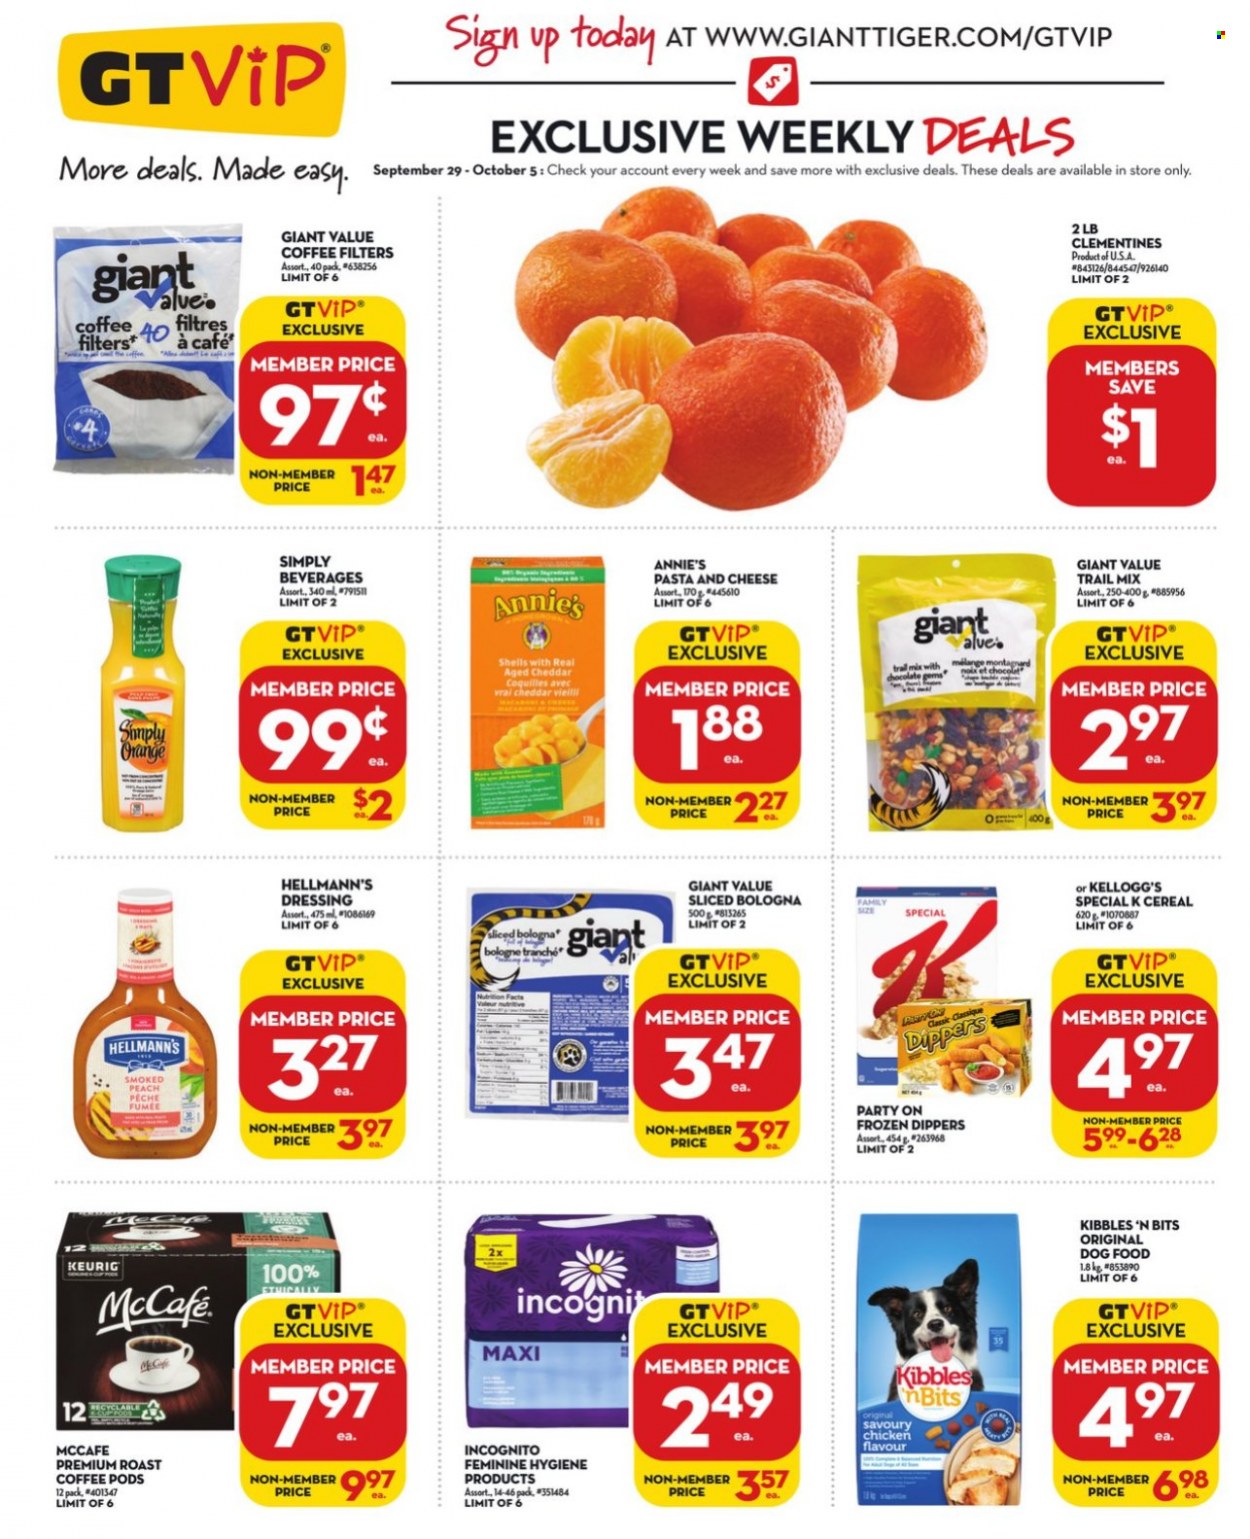 thumbnail - Giant Tiger Flyer - September 29, 2021 - October 05, 2021 - Sales products - clementines, pasta, Annie's, bologna sausage, cheddar, Hellmann’s, Kellogg's, cereals, dressing, trail mix, coffee pods, McCafe, Keurig, animal food, dog food, oranges. Page 5.